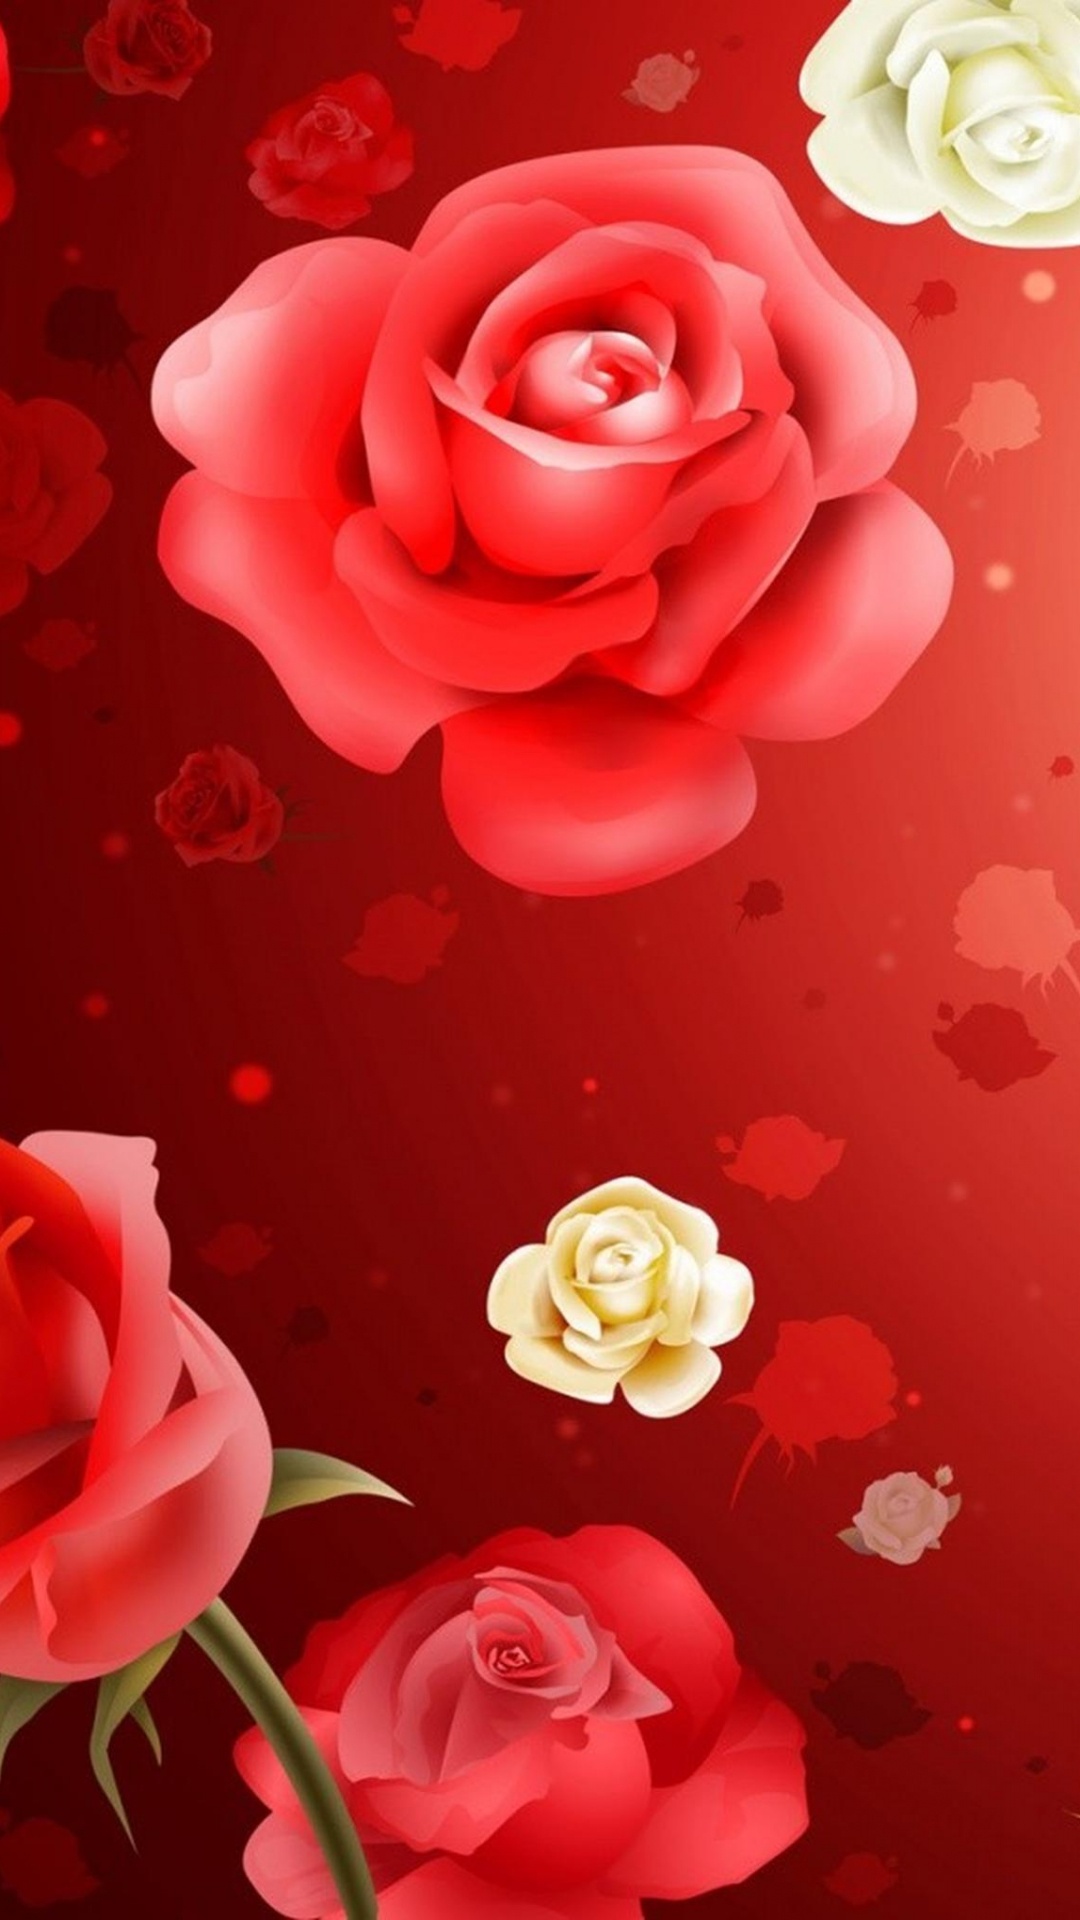 Roses Blanches et Roses Sur Surface Rouge. Wallpaper in 1080x1920 Resolution